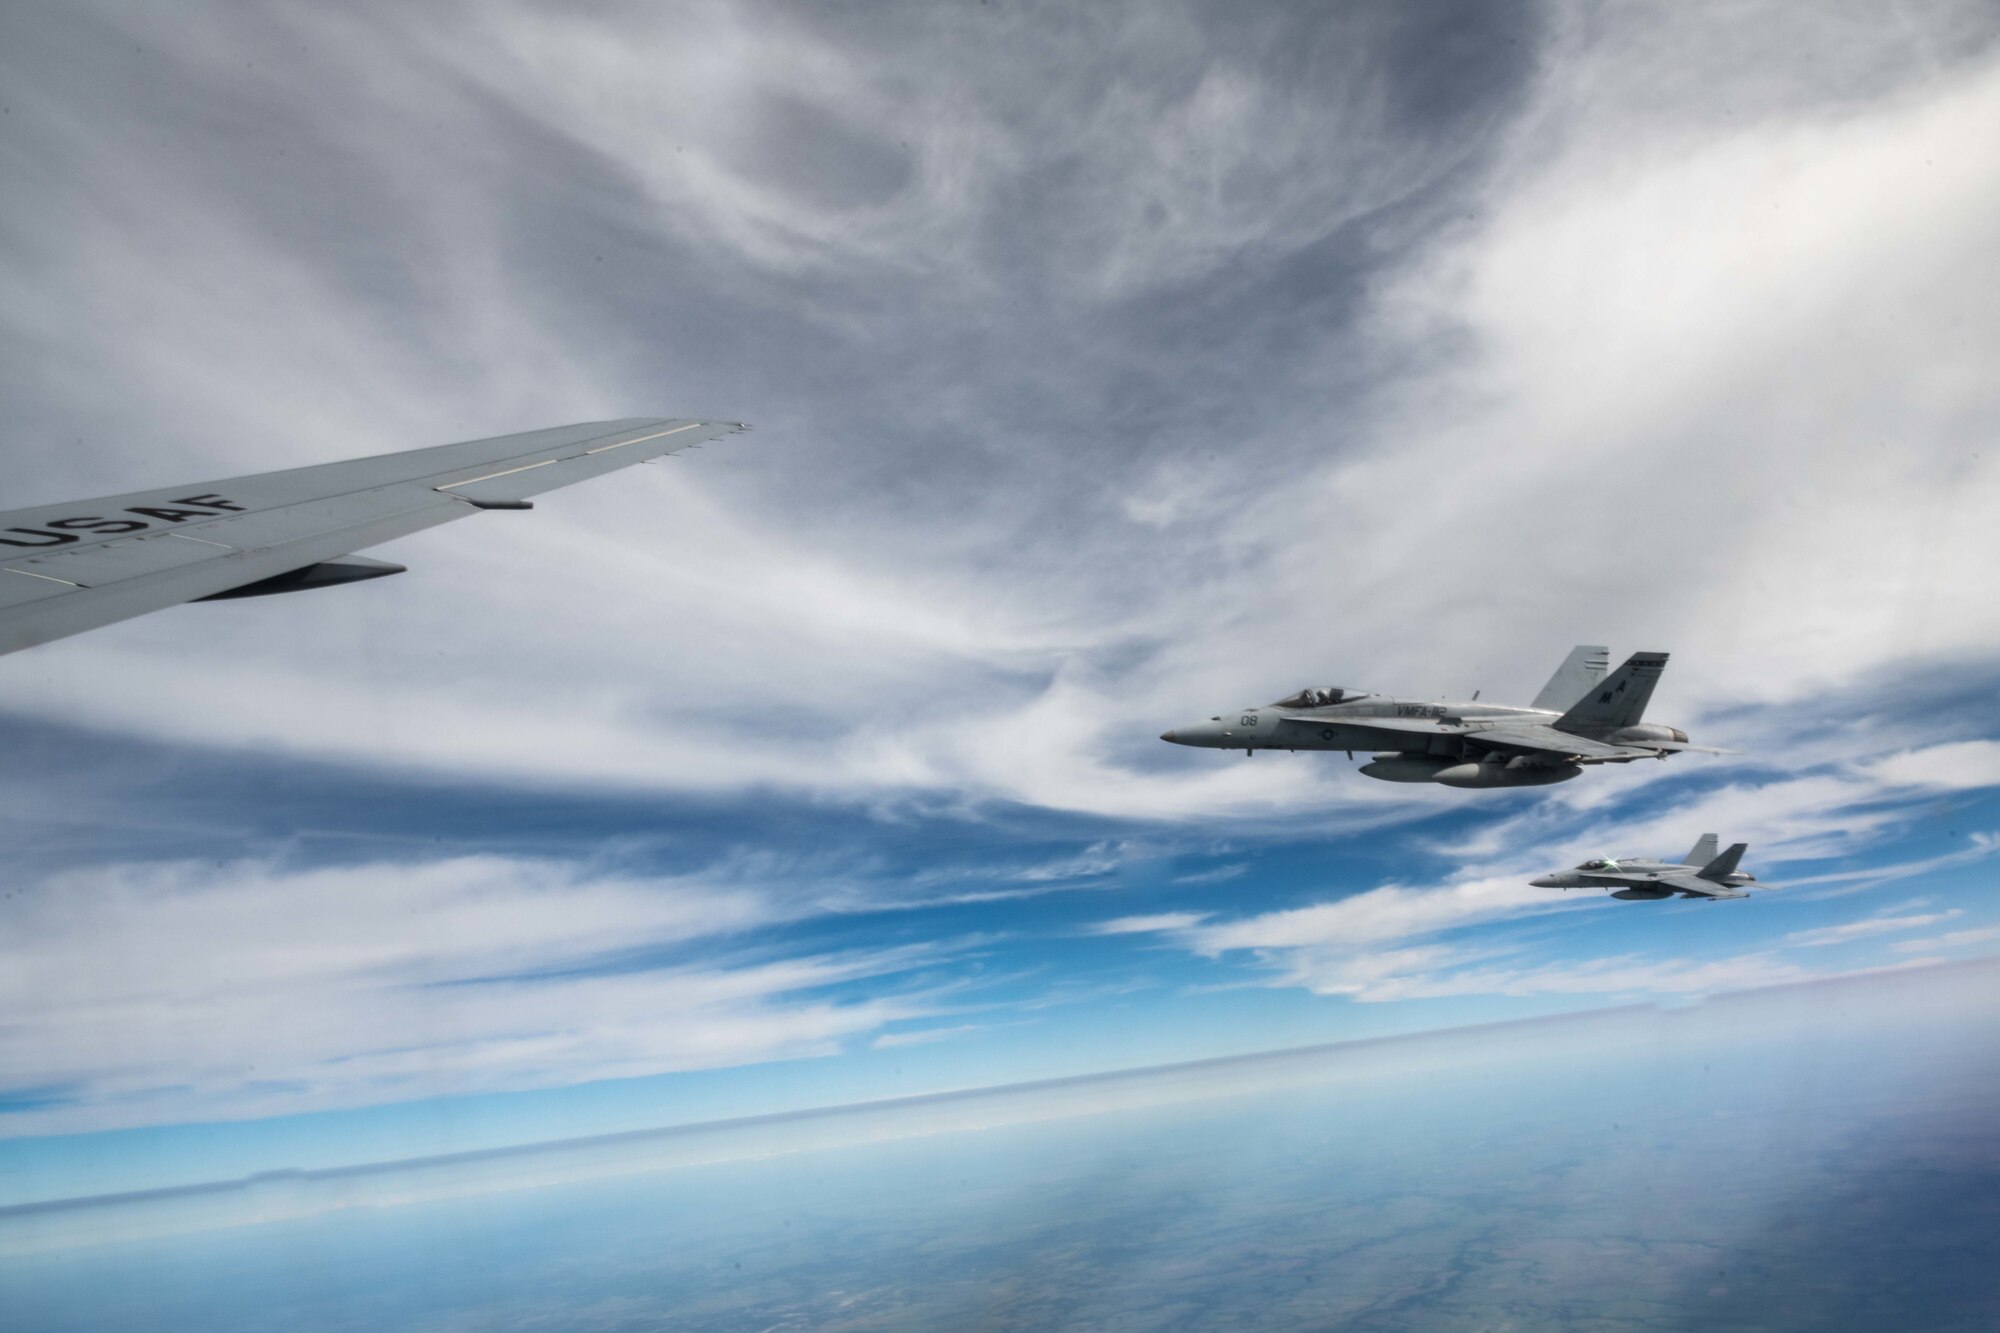 An F/A-18 Hornet from Marine Fighter Attack Squadron 112, Fort Worth, Texas, flies in formation with a KC-46A Pegasus from the 22nd Air Refueling Wing, McConnell Air Force Base, Kansas, while awaiting fuel Aug. 11, 2021.